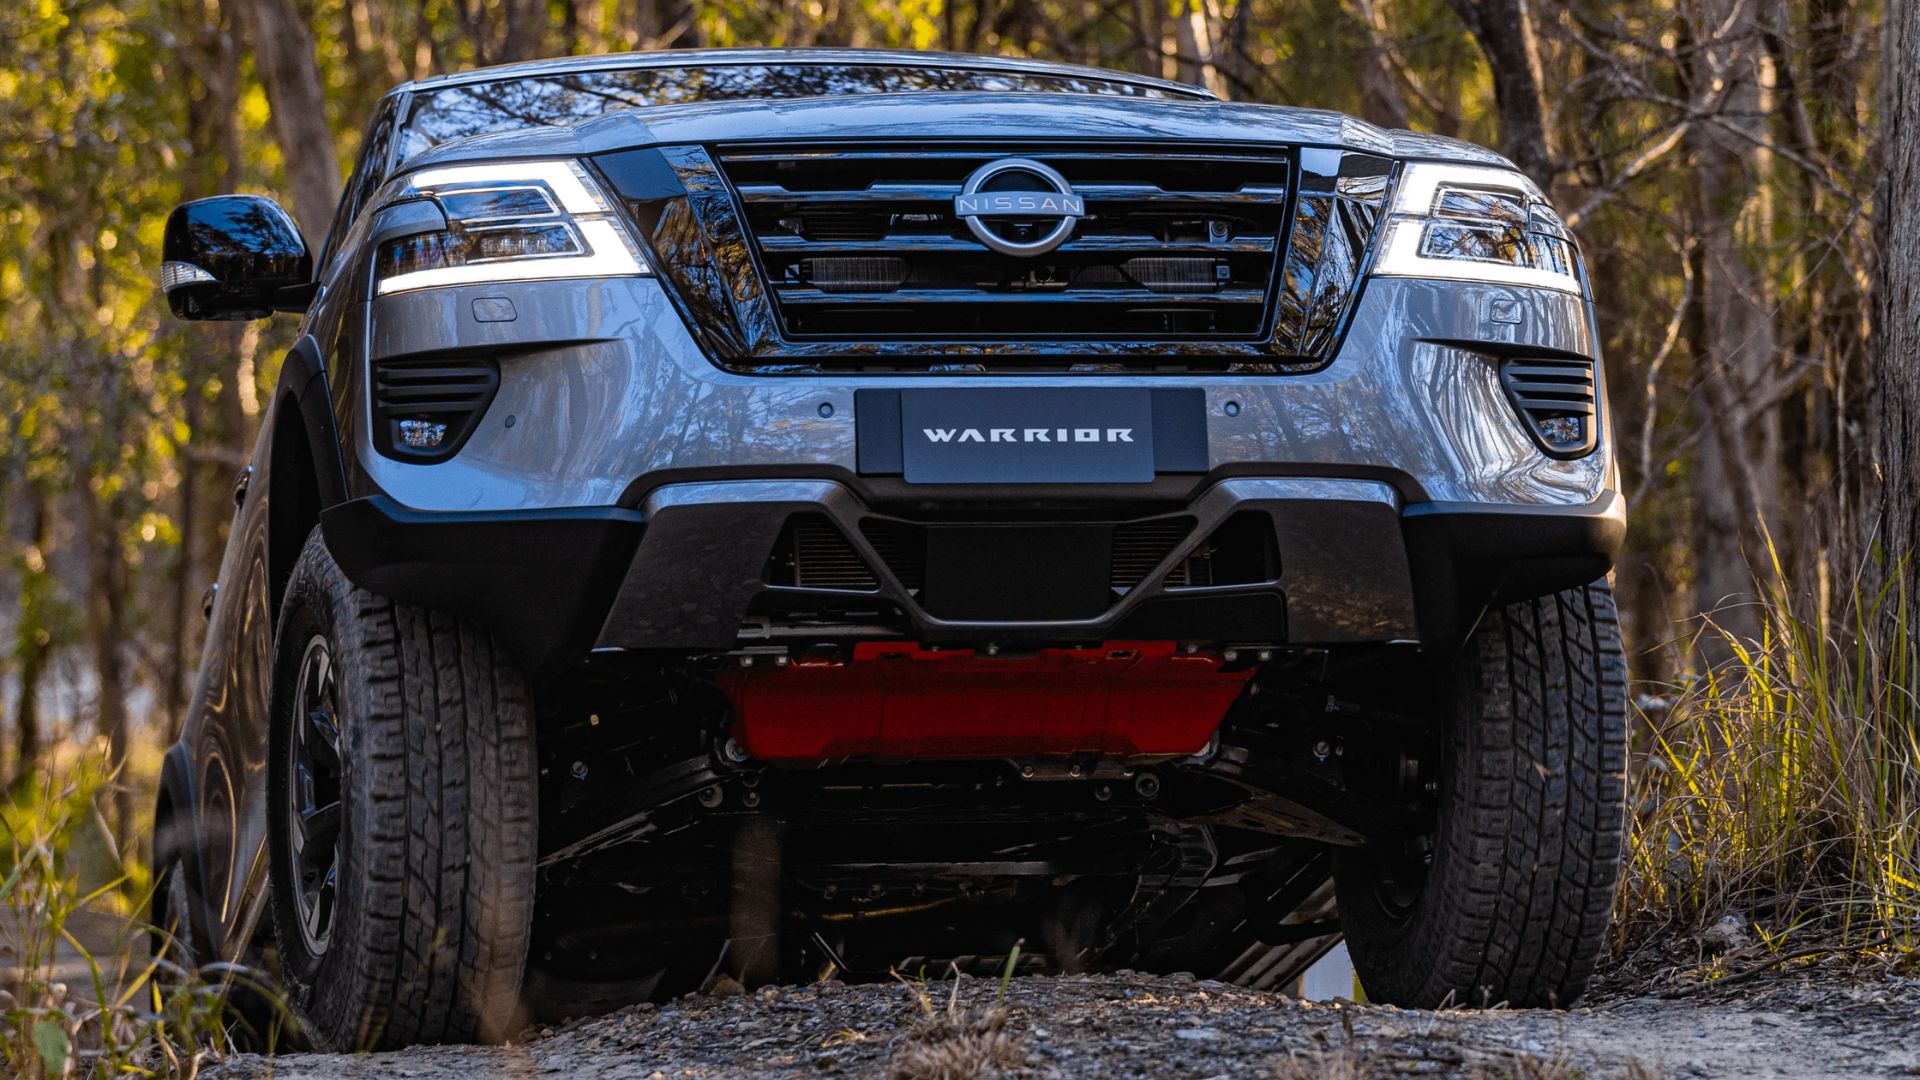 REVIEW: DRIVE road tests the new Nissan Patrol WARRIOR by Premcar - Premcar